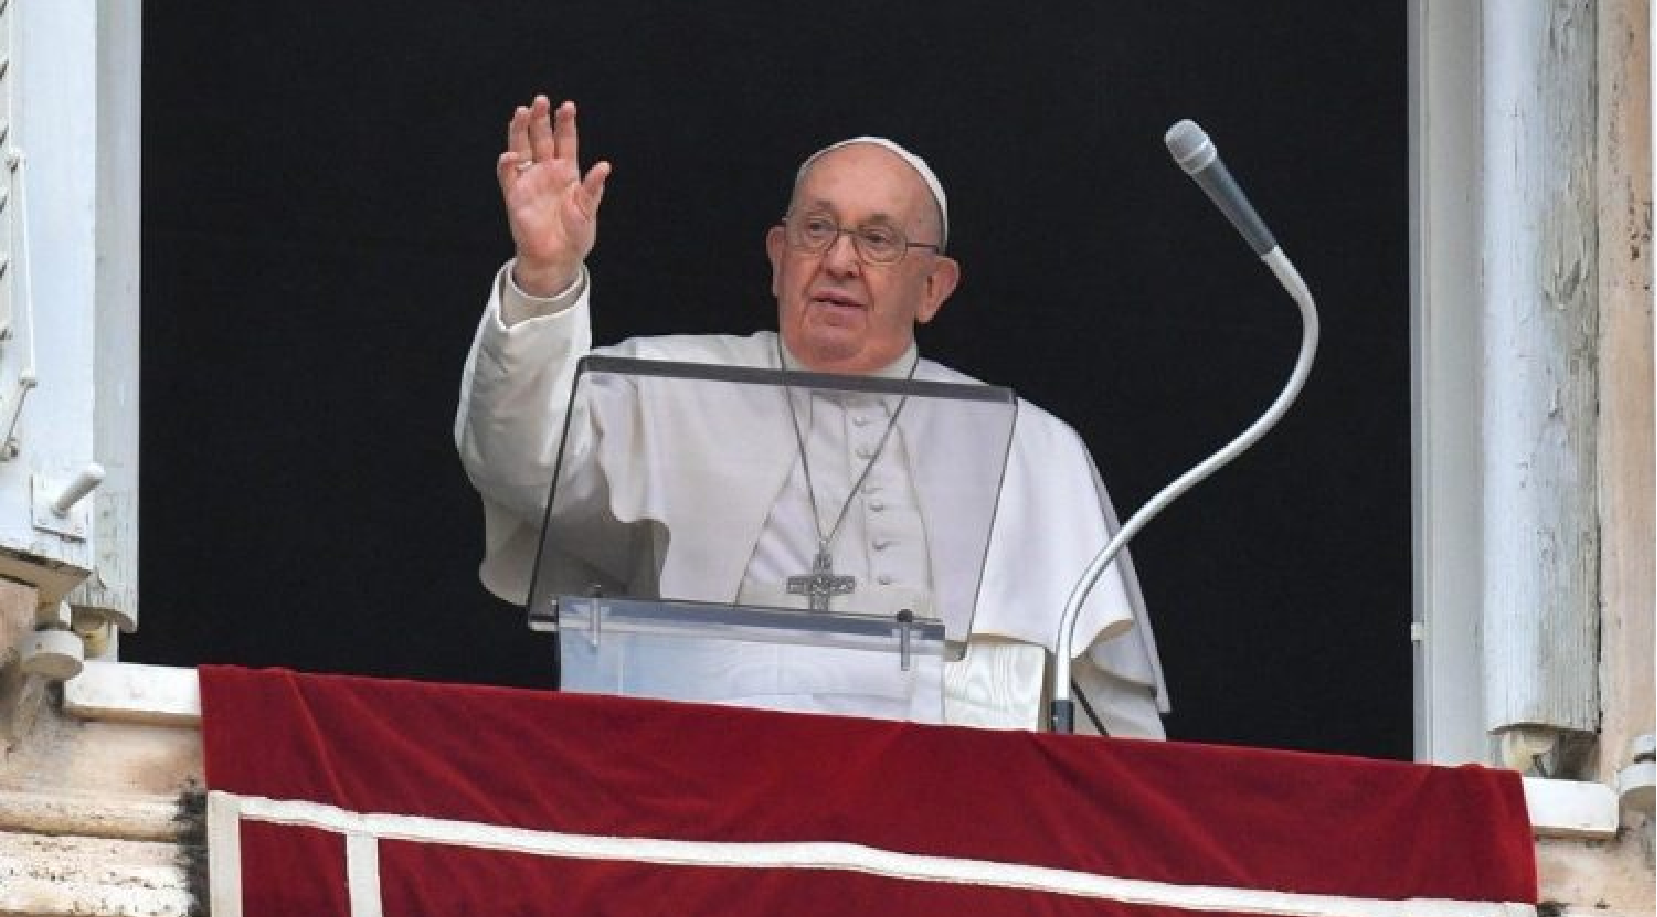 Pope Francis prayed the Angelus from the window of his papal apartment with at least 15,000 pilgrims and tourists